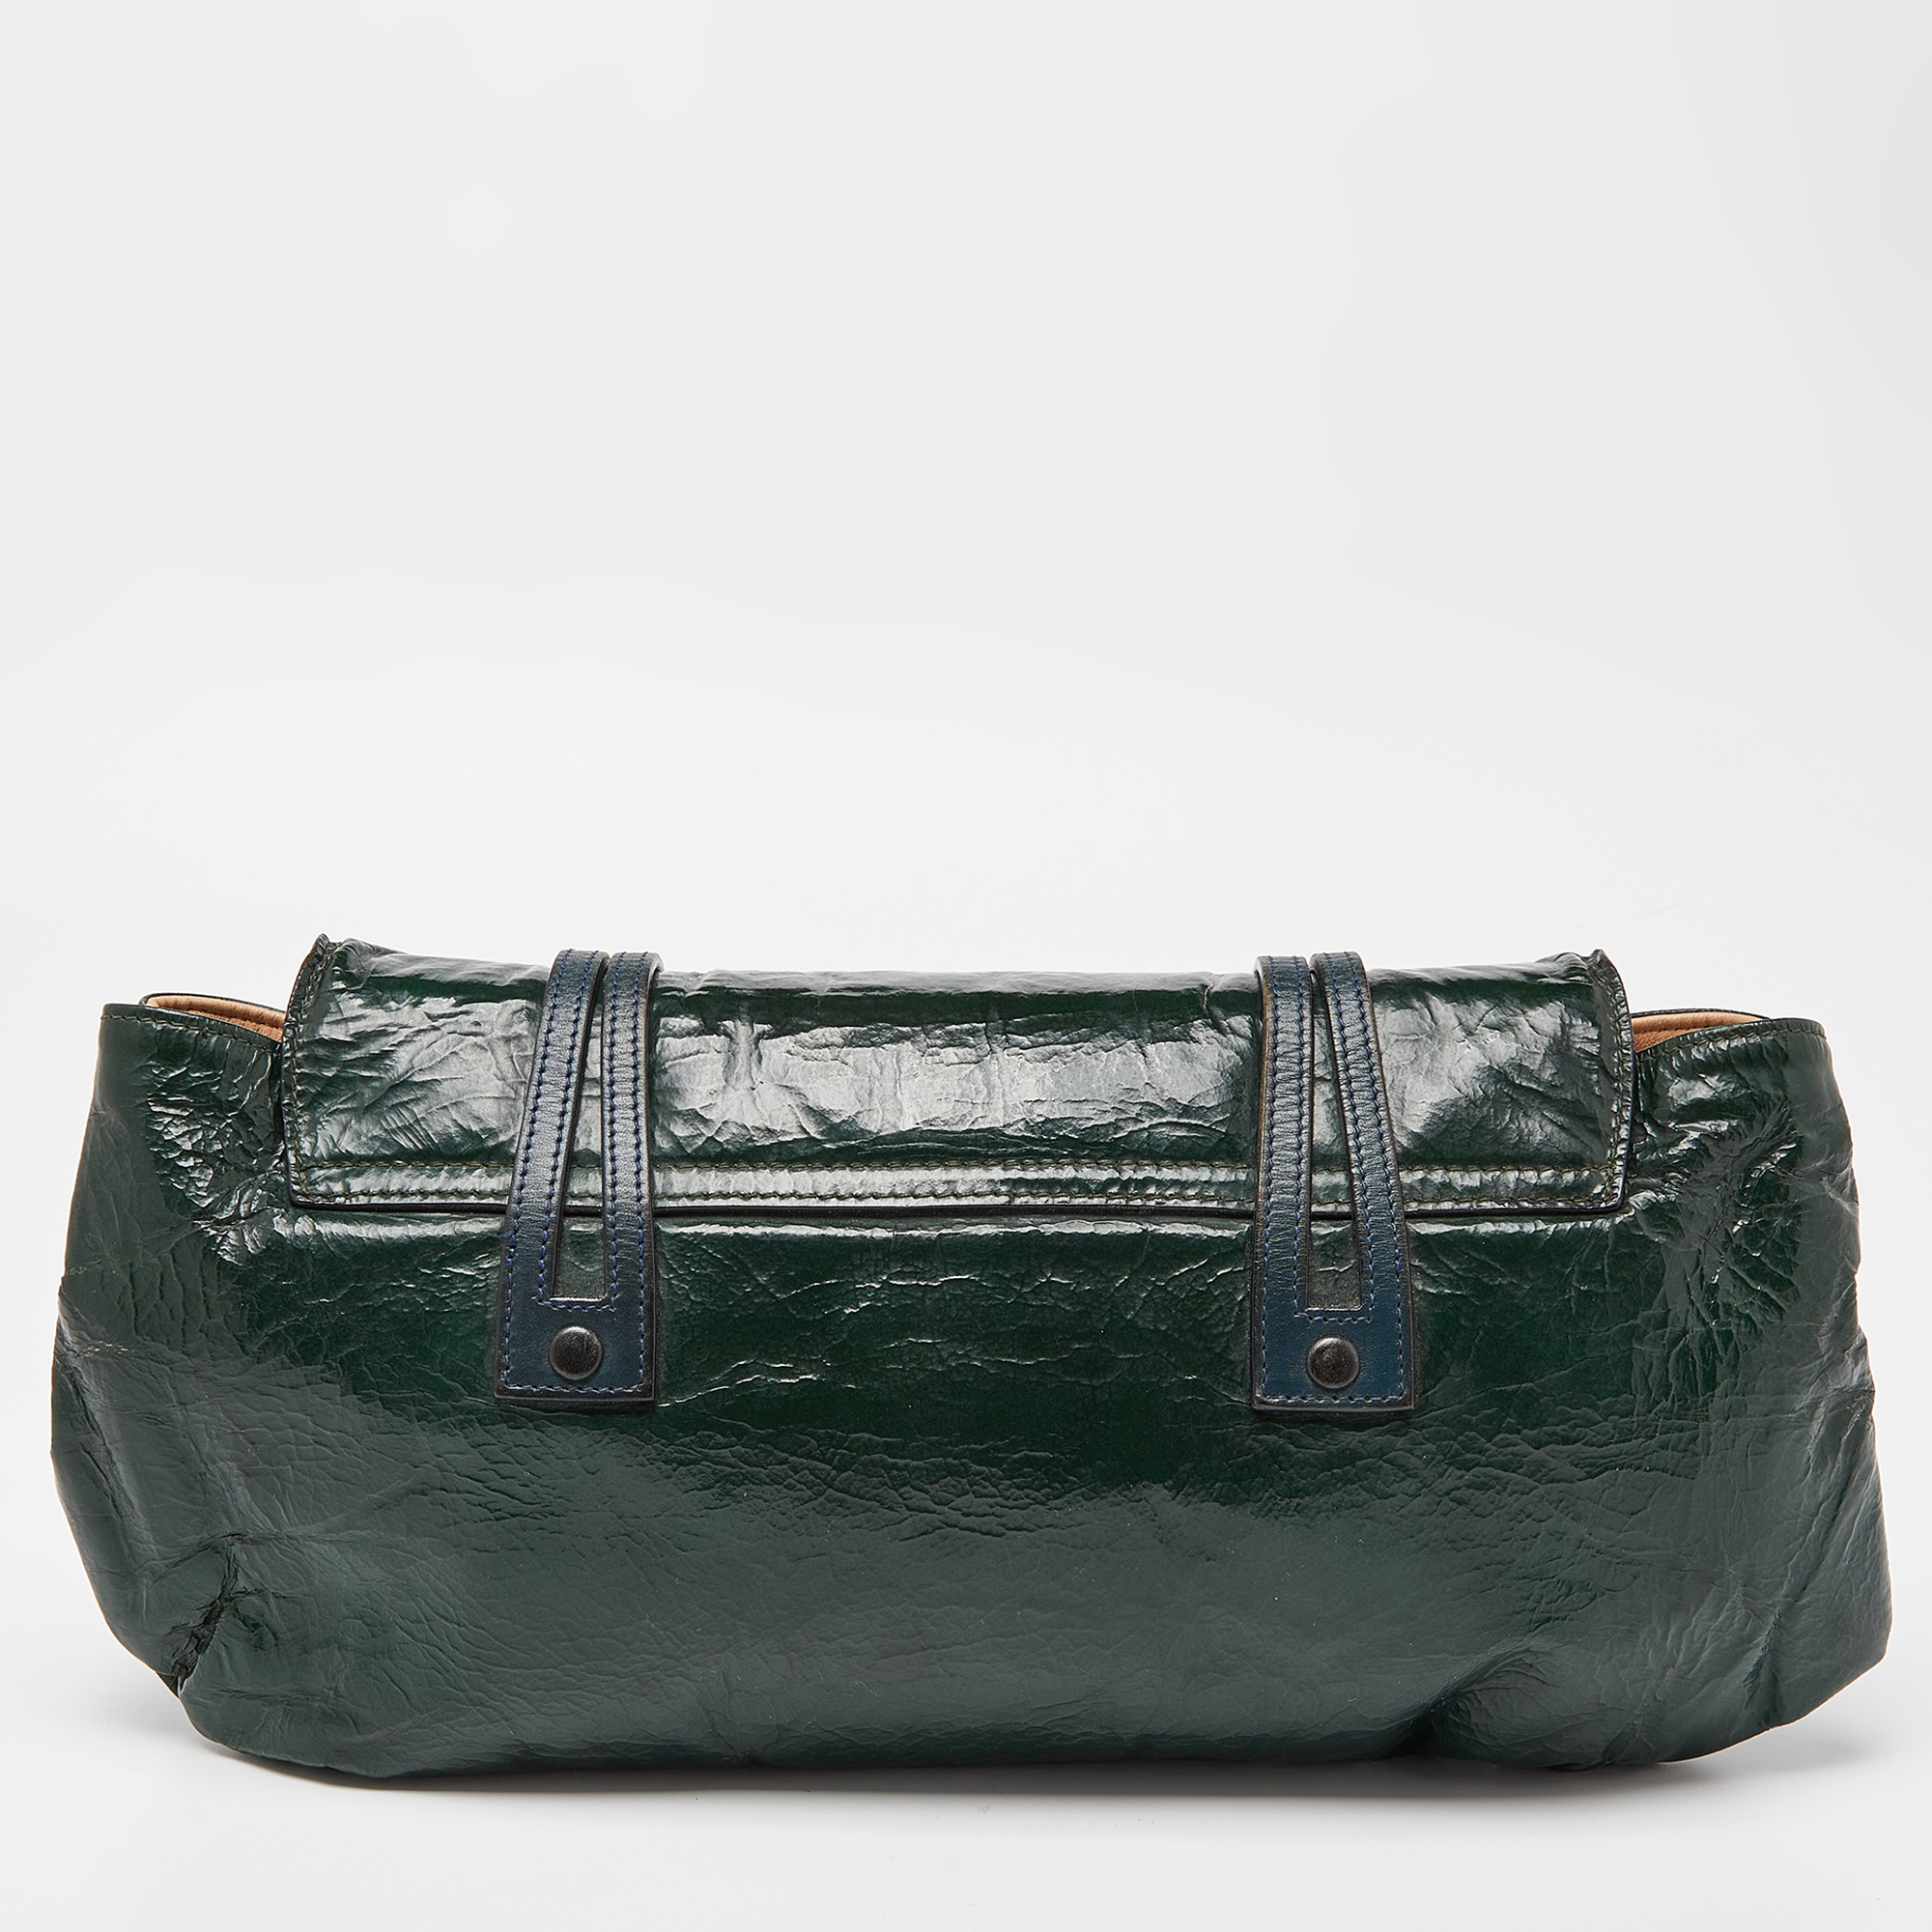 Chloe Green Patent And Leather Flap Crossbody Bag